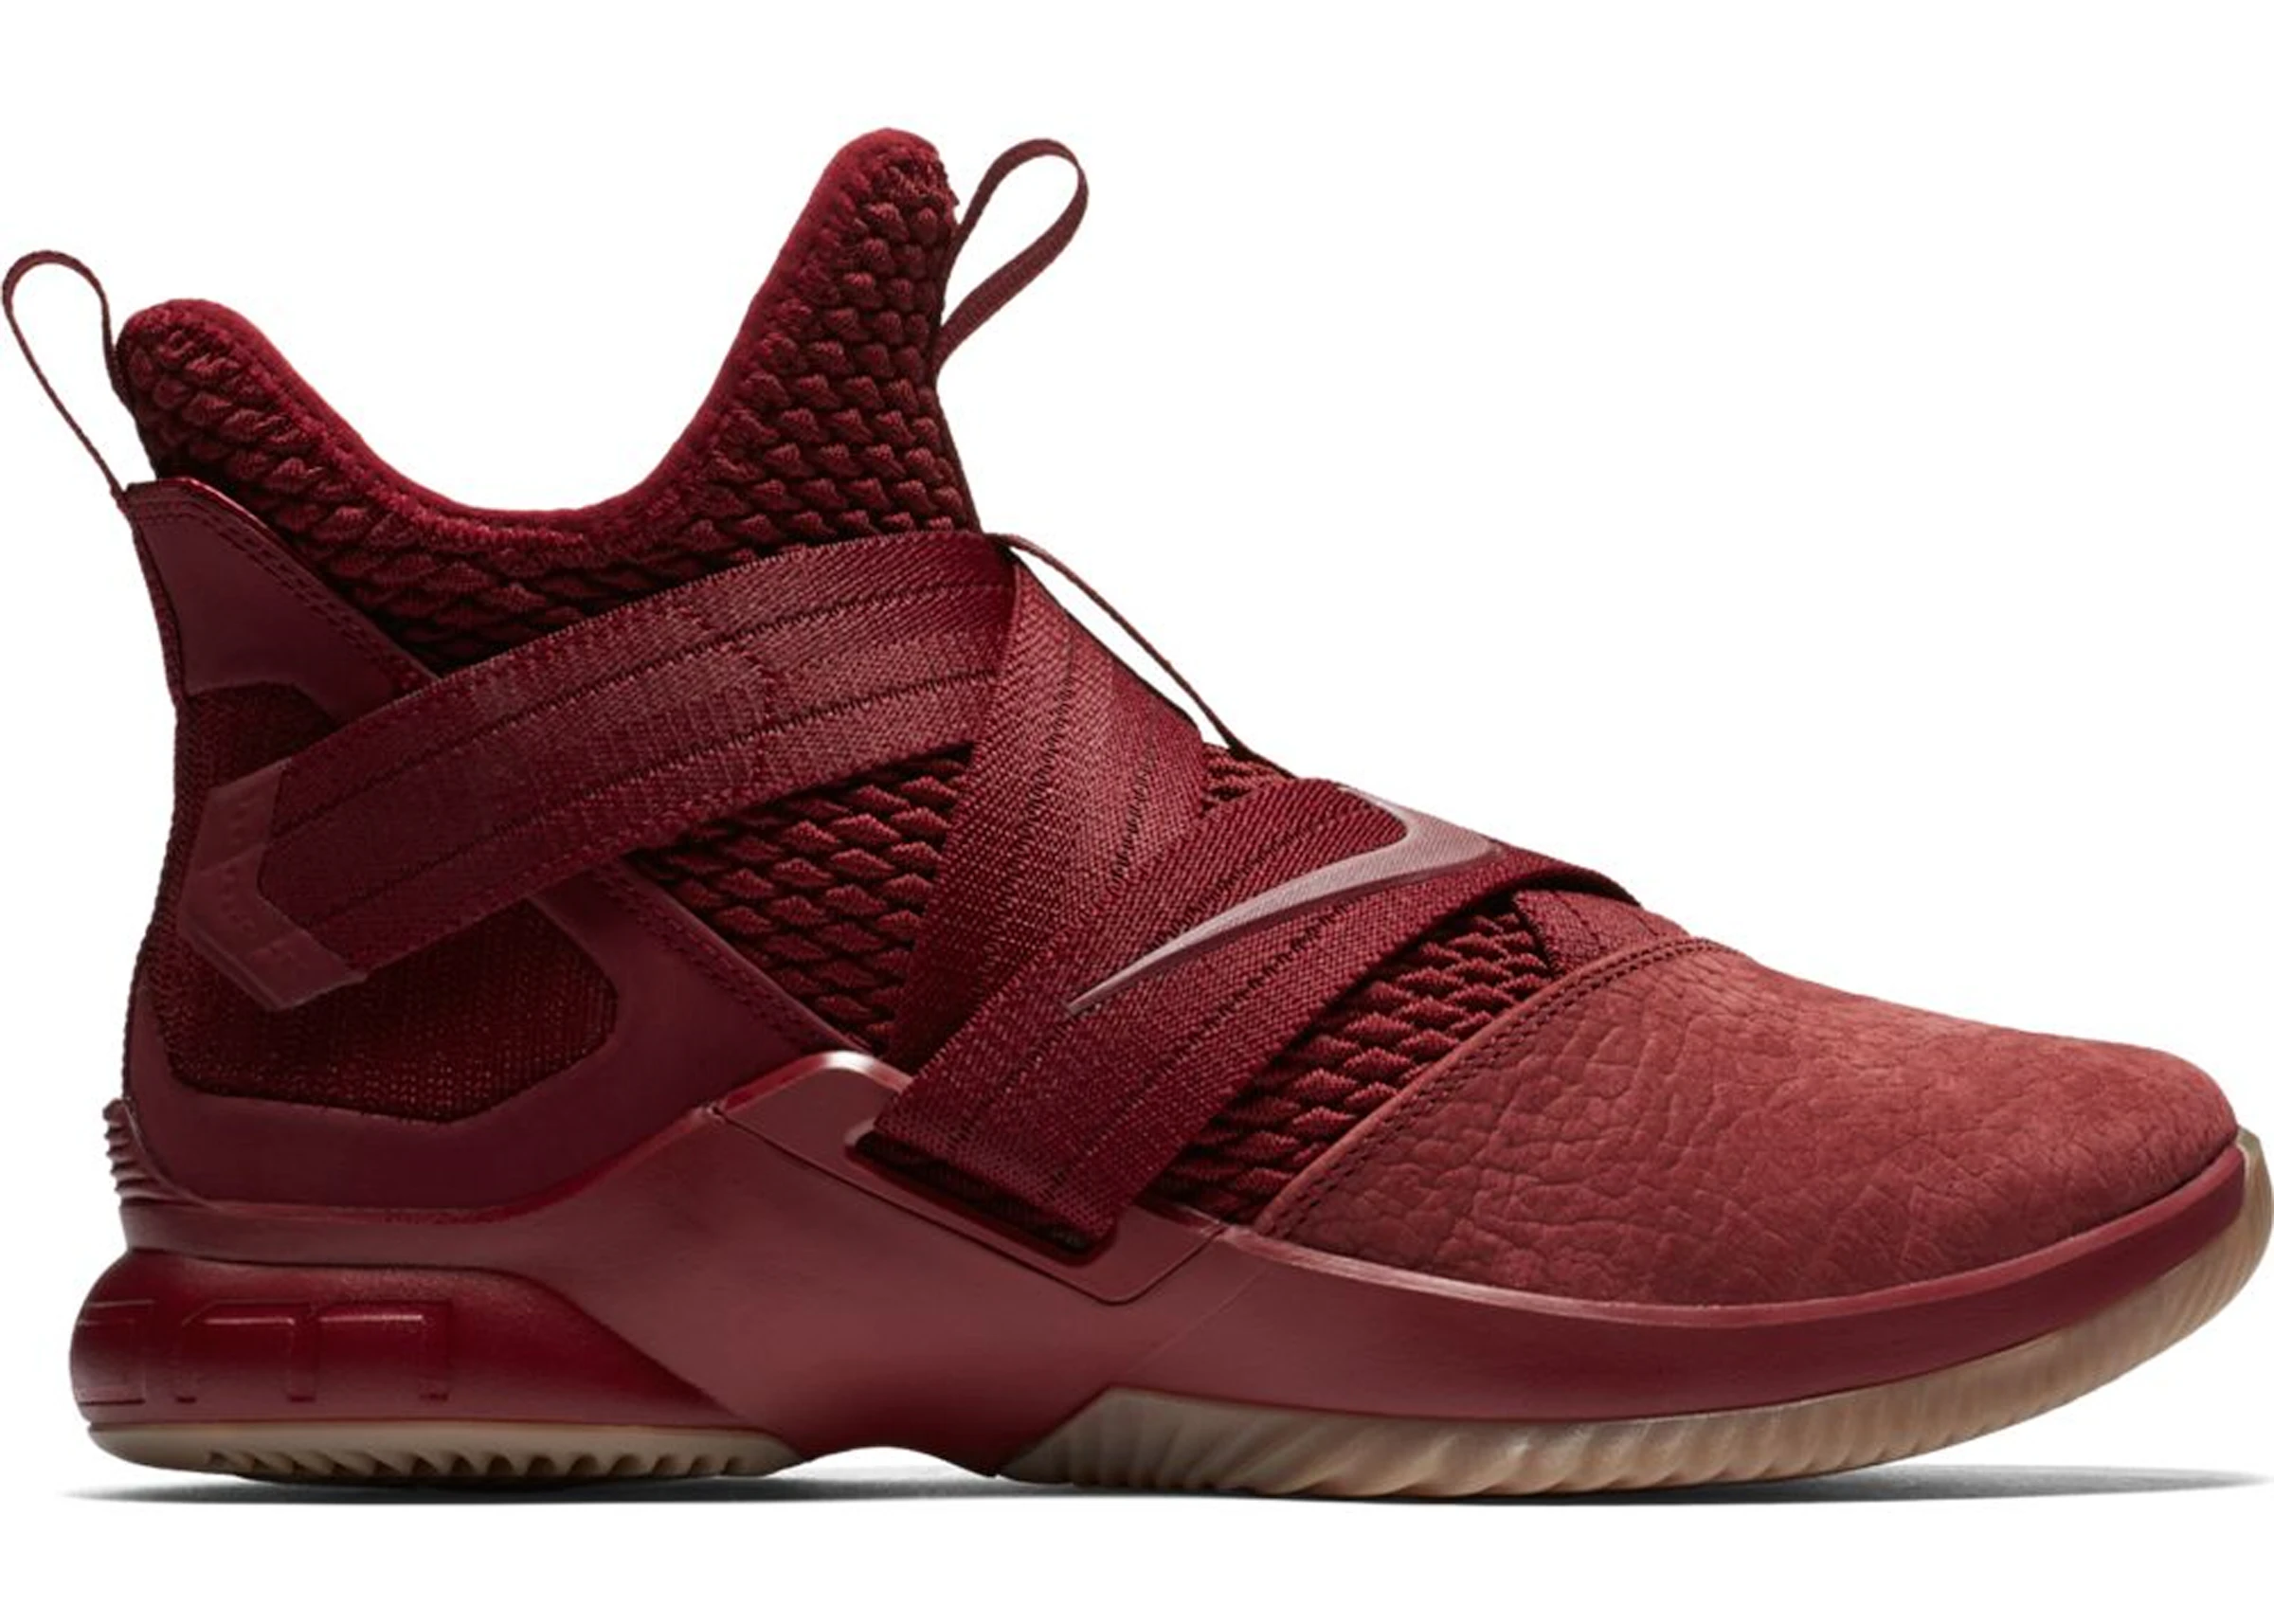 Offense To construct to add Nike LeBron Soldier 12 Team Red Gum - AO4054-600/AO4055-600 - US